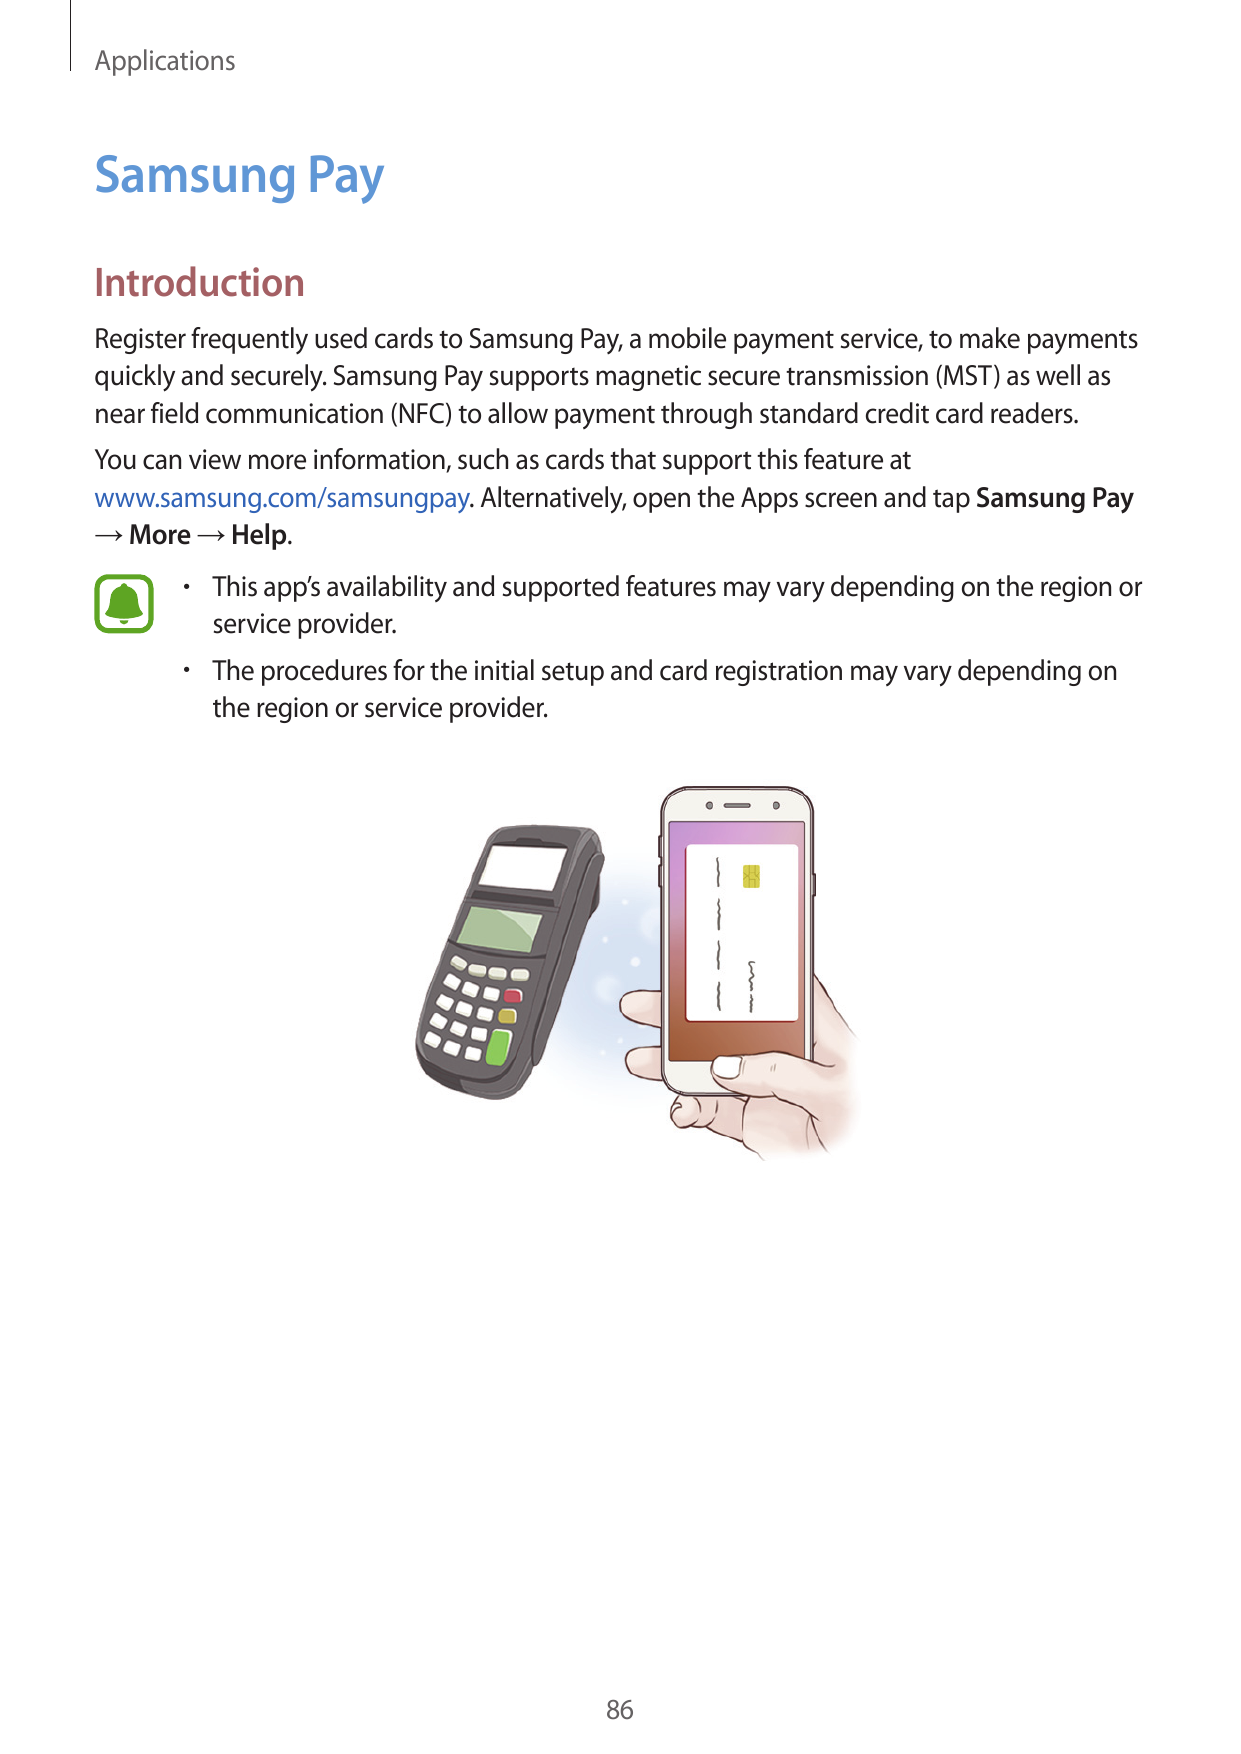 ApplicationsSamsung PayIntroductionRegister frequently used cards to Samsung Pay, a mobile payment service, to make paymentsquic